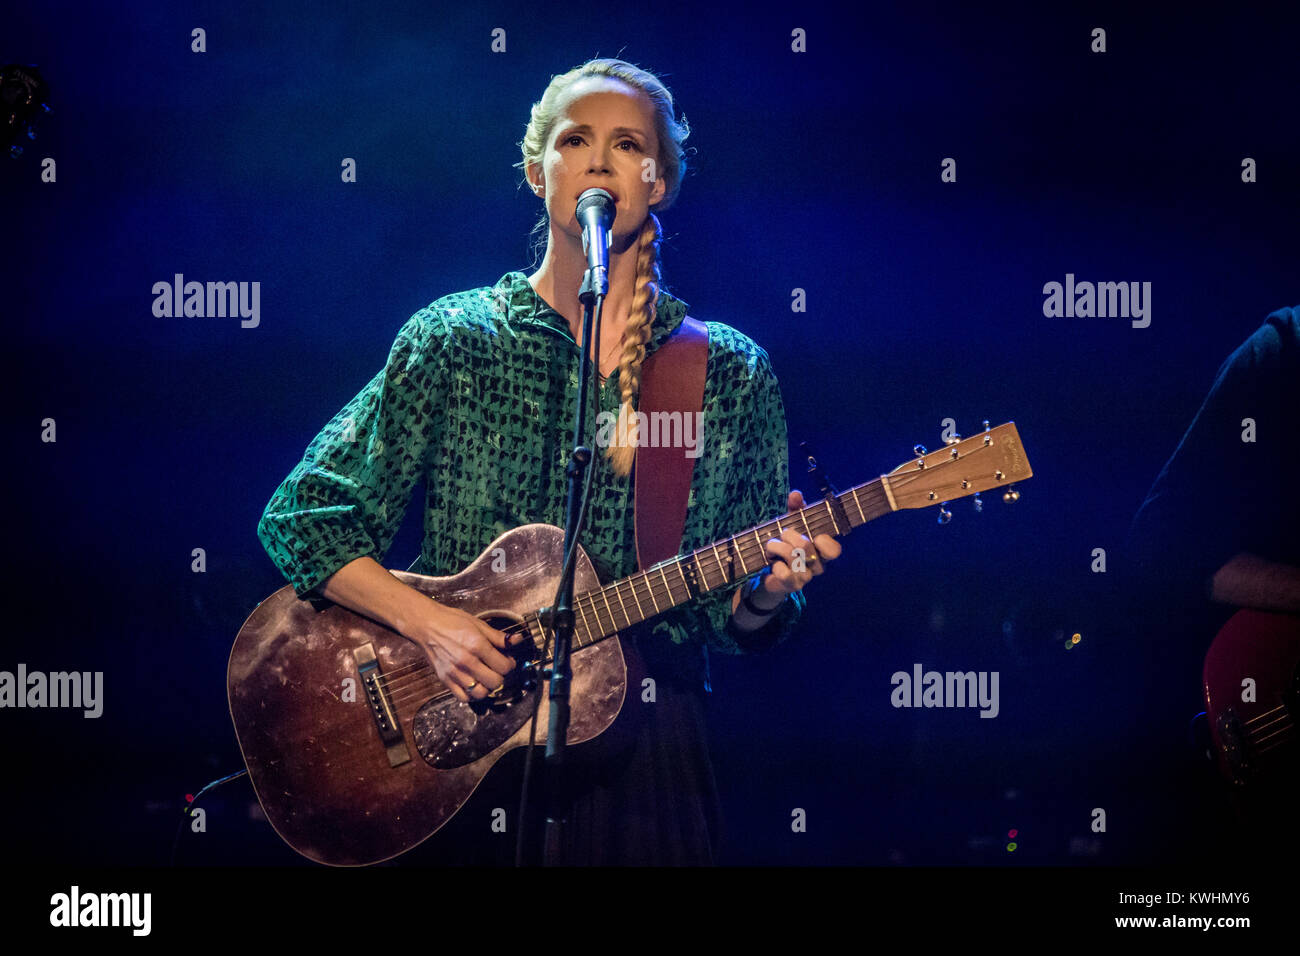 The Danish singer, musician and songwriter Tina Dickow (known as Tina Dico abroad) performs a live concert the Awards 2014 in Copenhagen. Denmark, 2014 Photo - Alamy